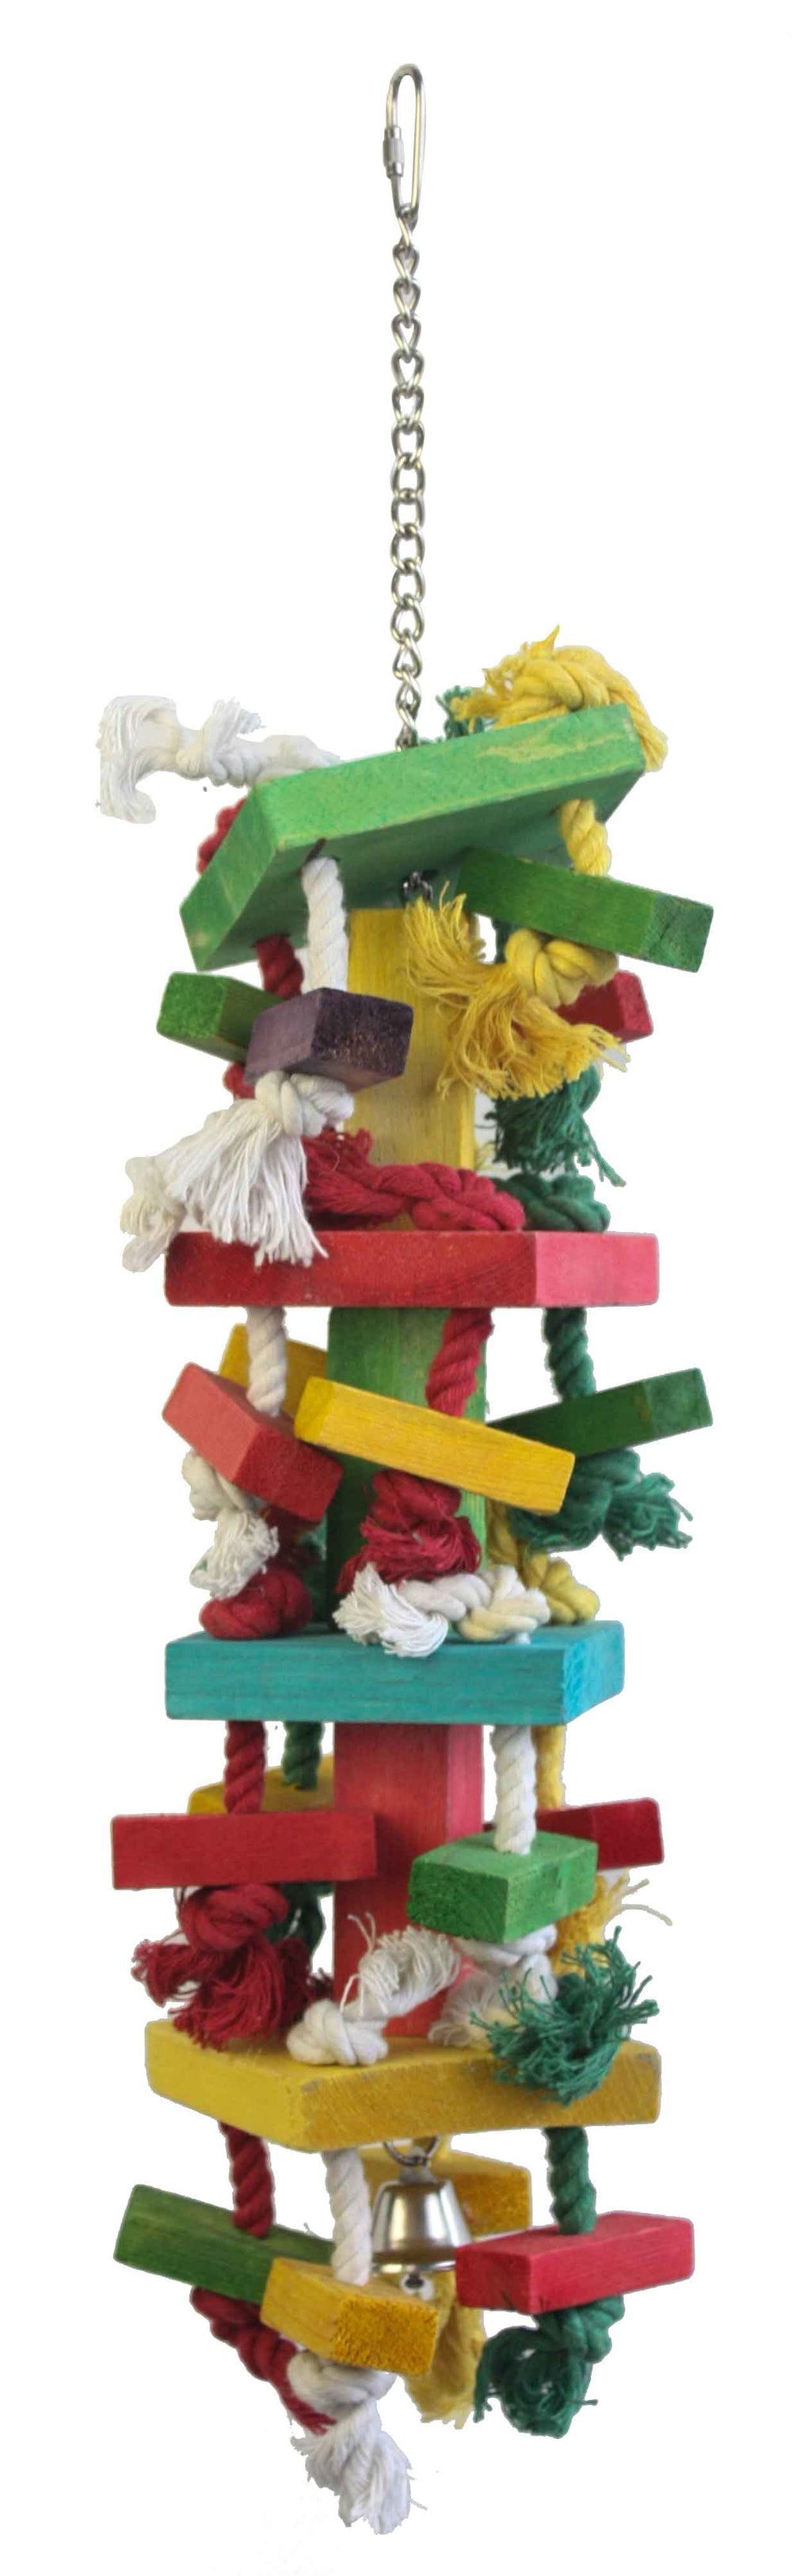 Climbing Wall Parrot Toy - Pet Products R Us